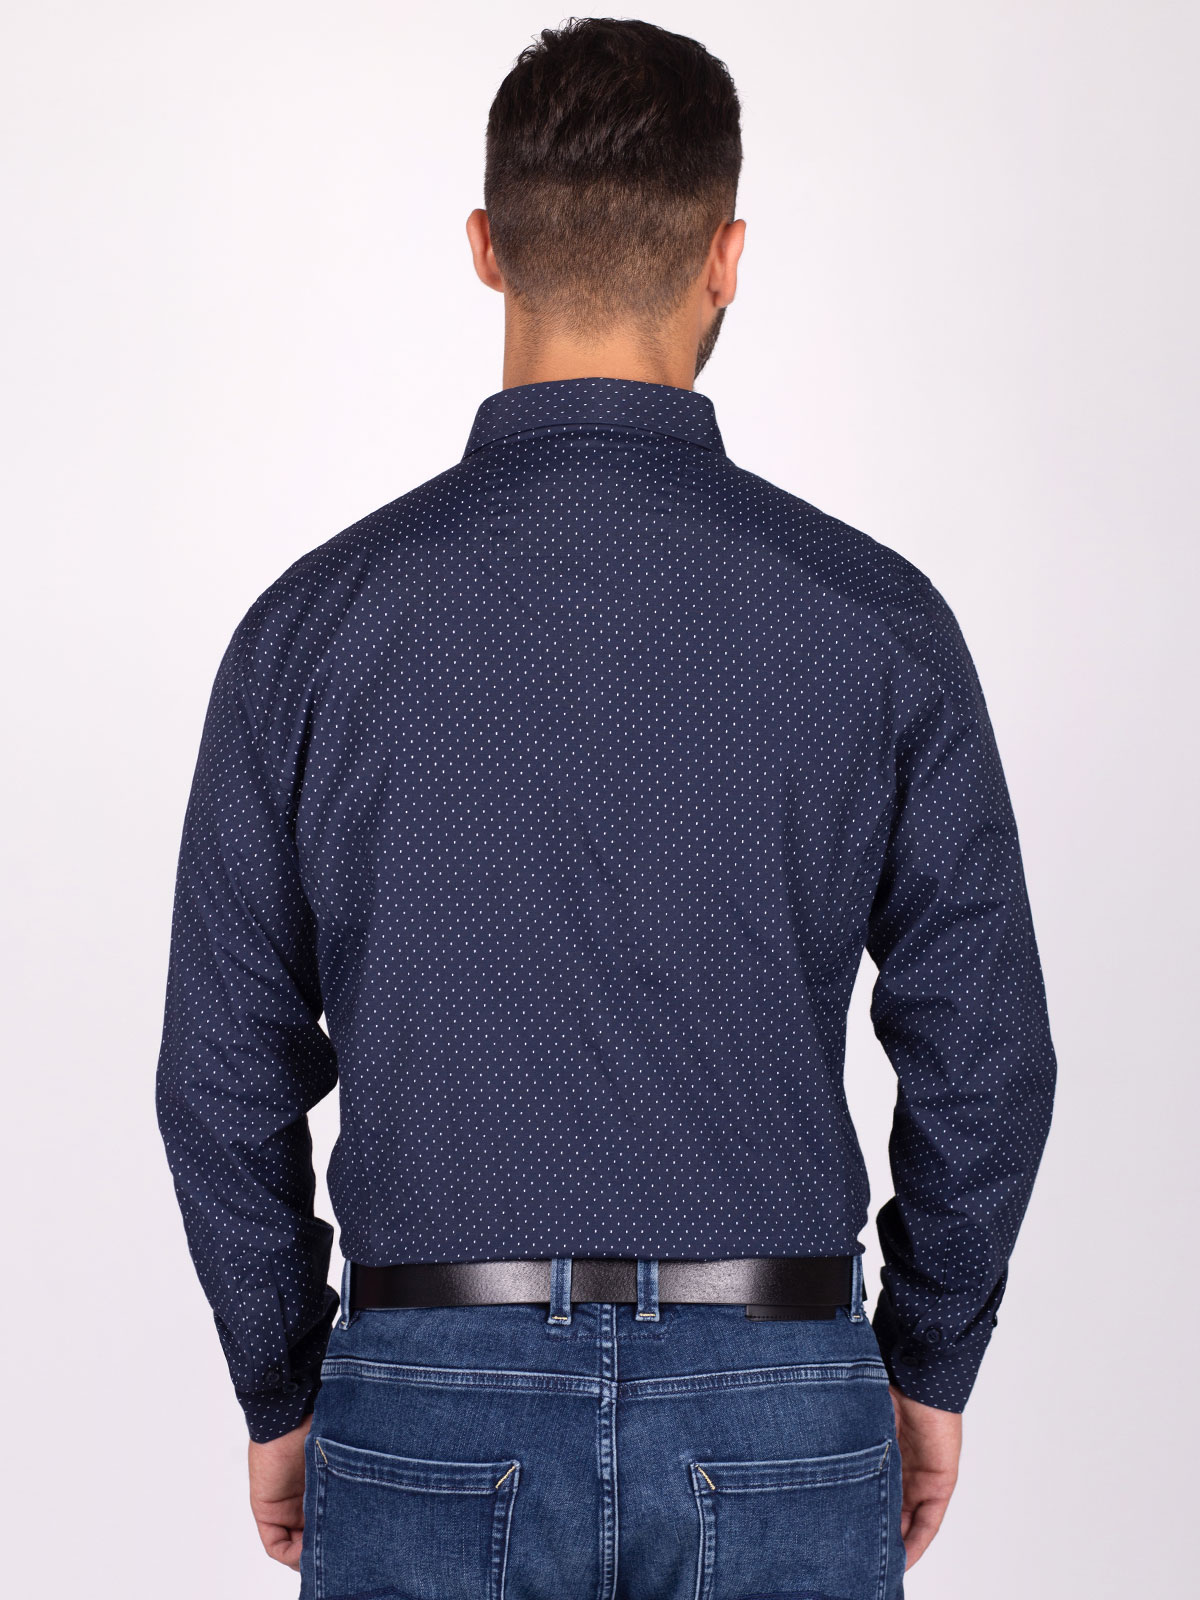 Navy blue shirt with print - 21513 € 41.62 img4